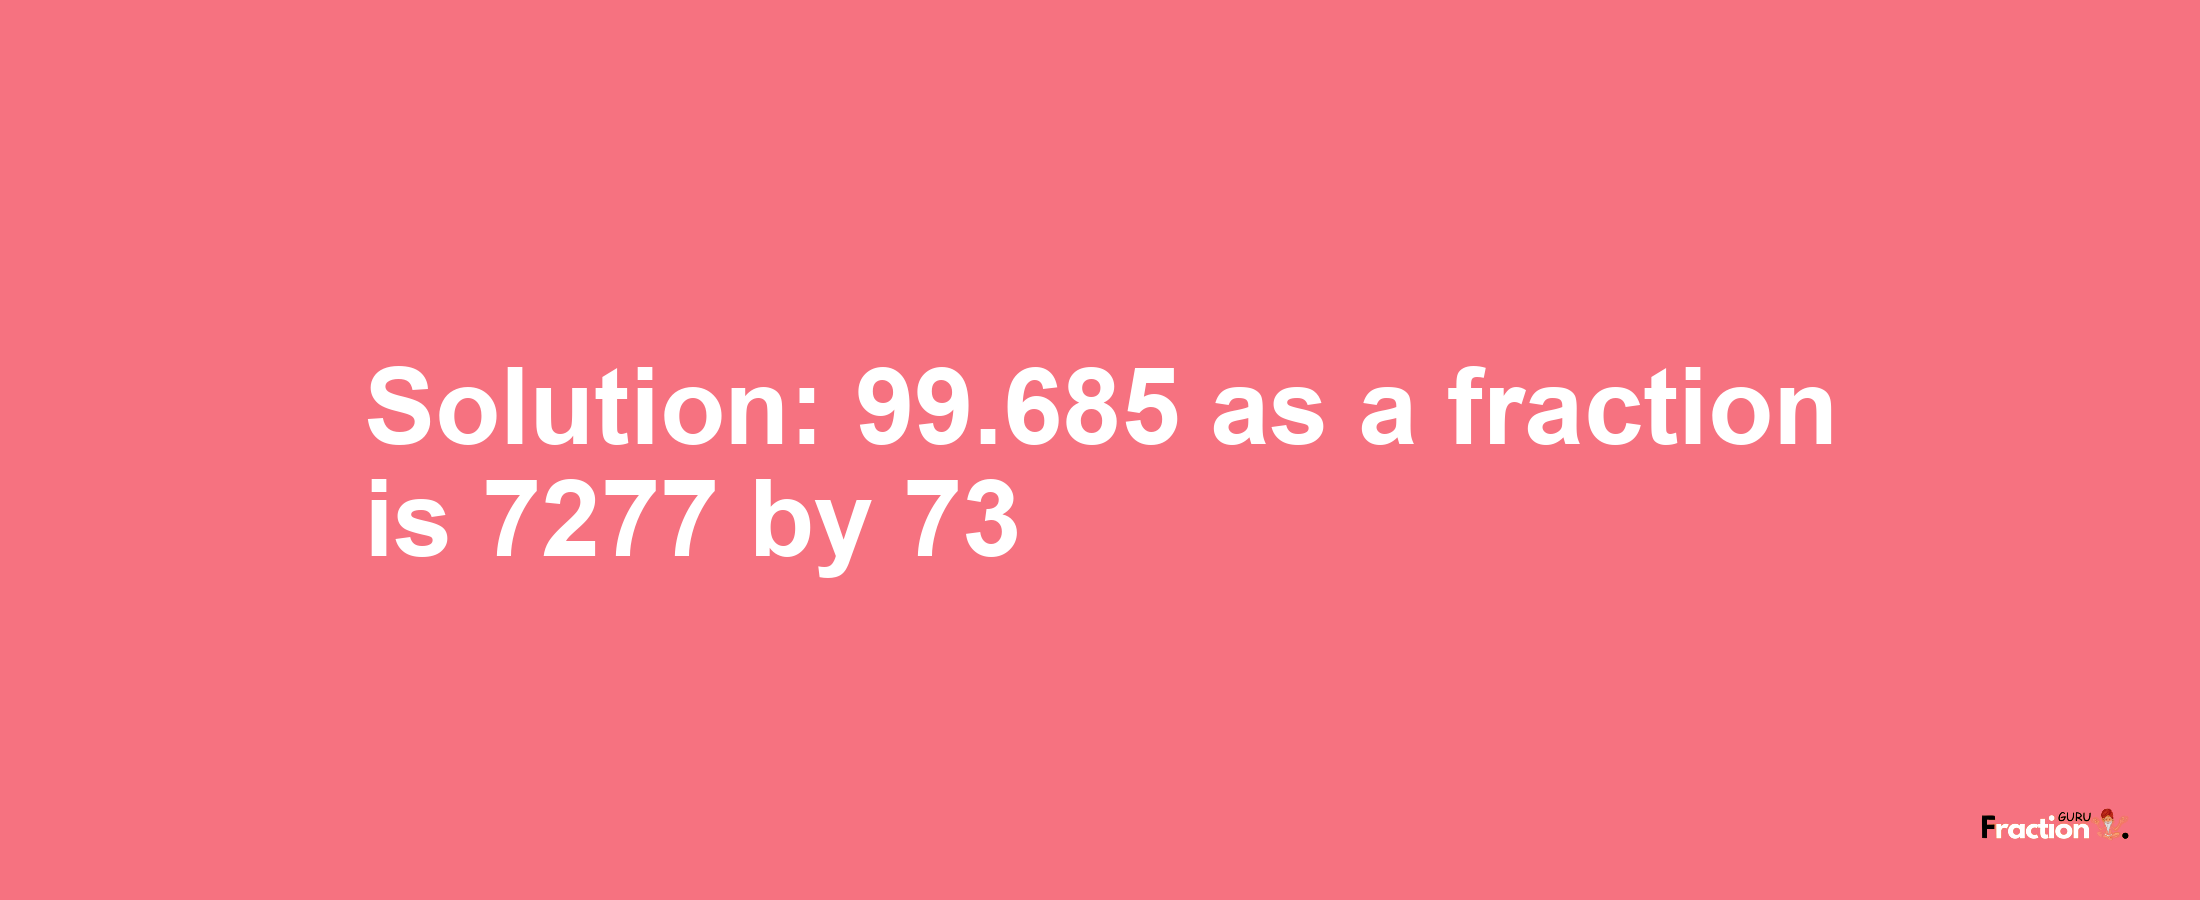 Solution:99.685 as a fraction is 7277/73